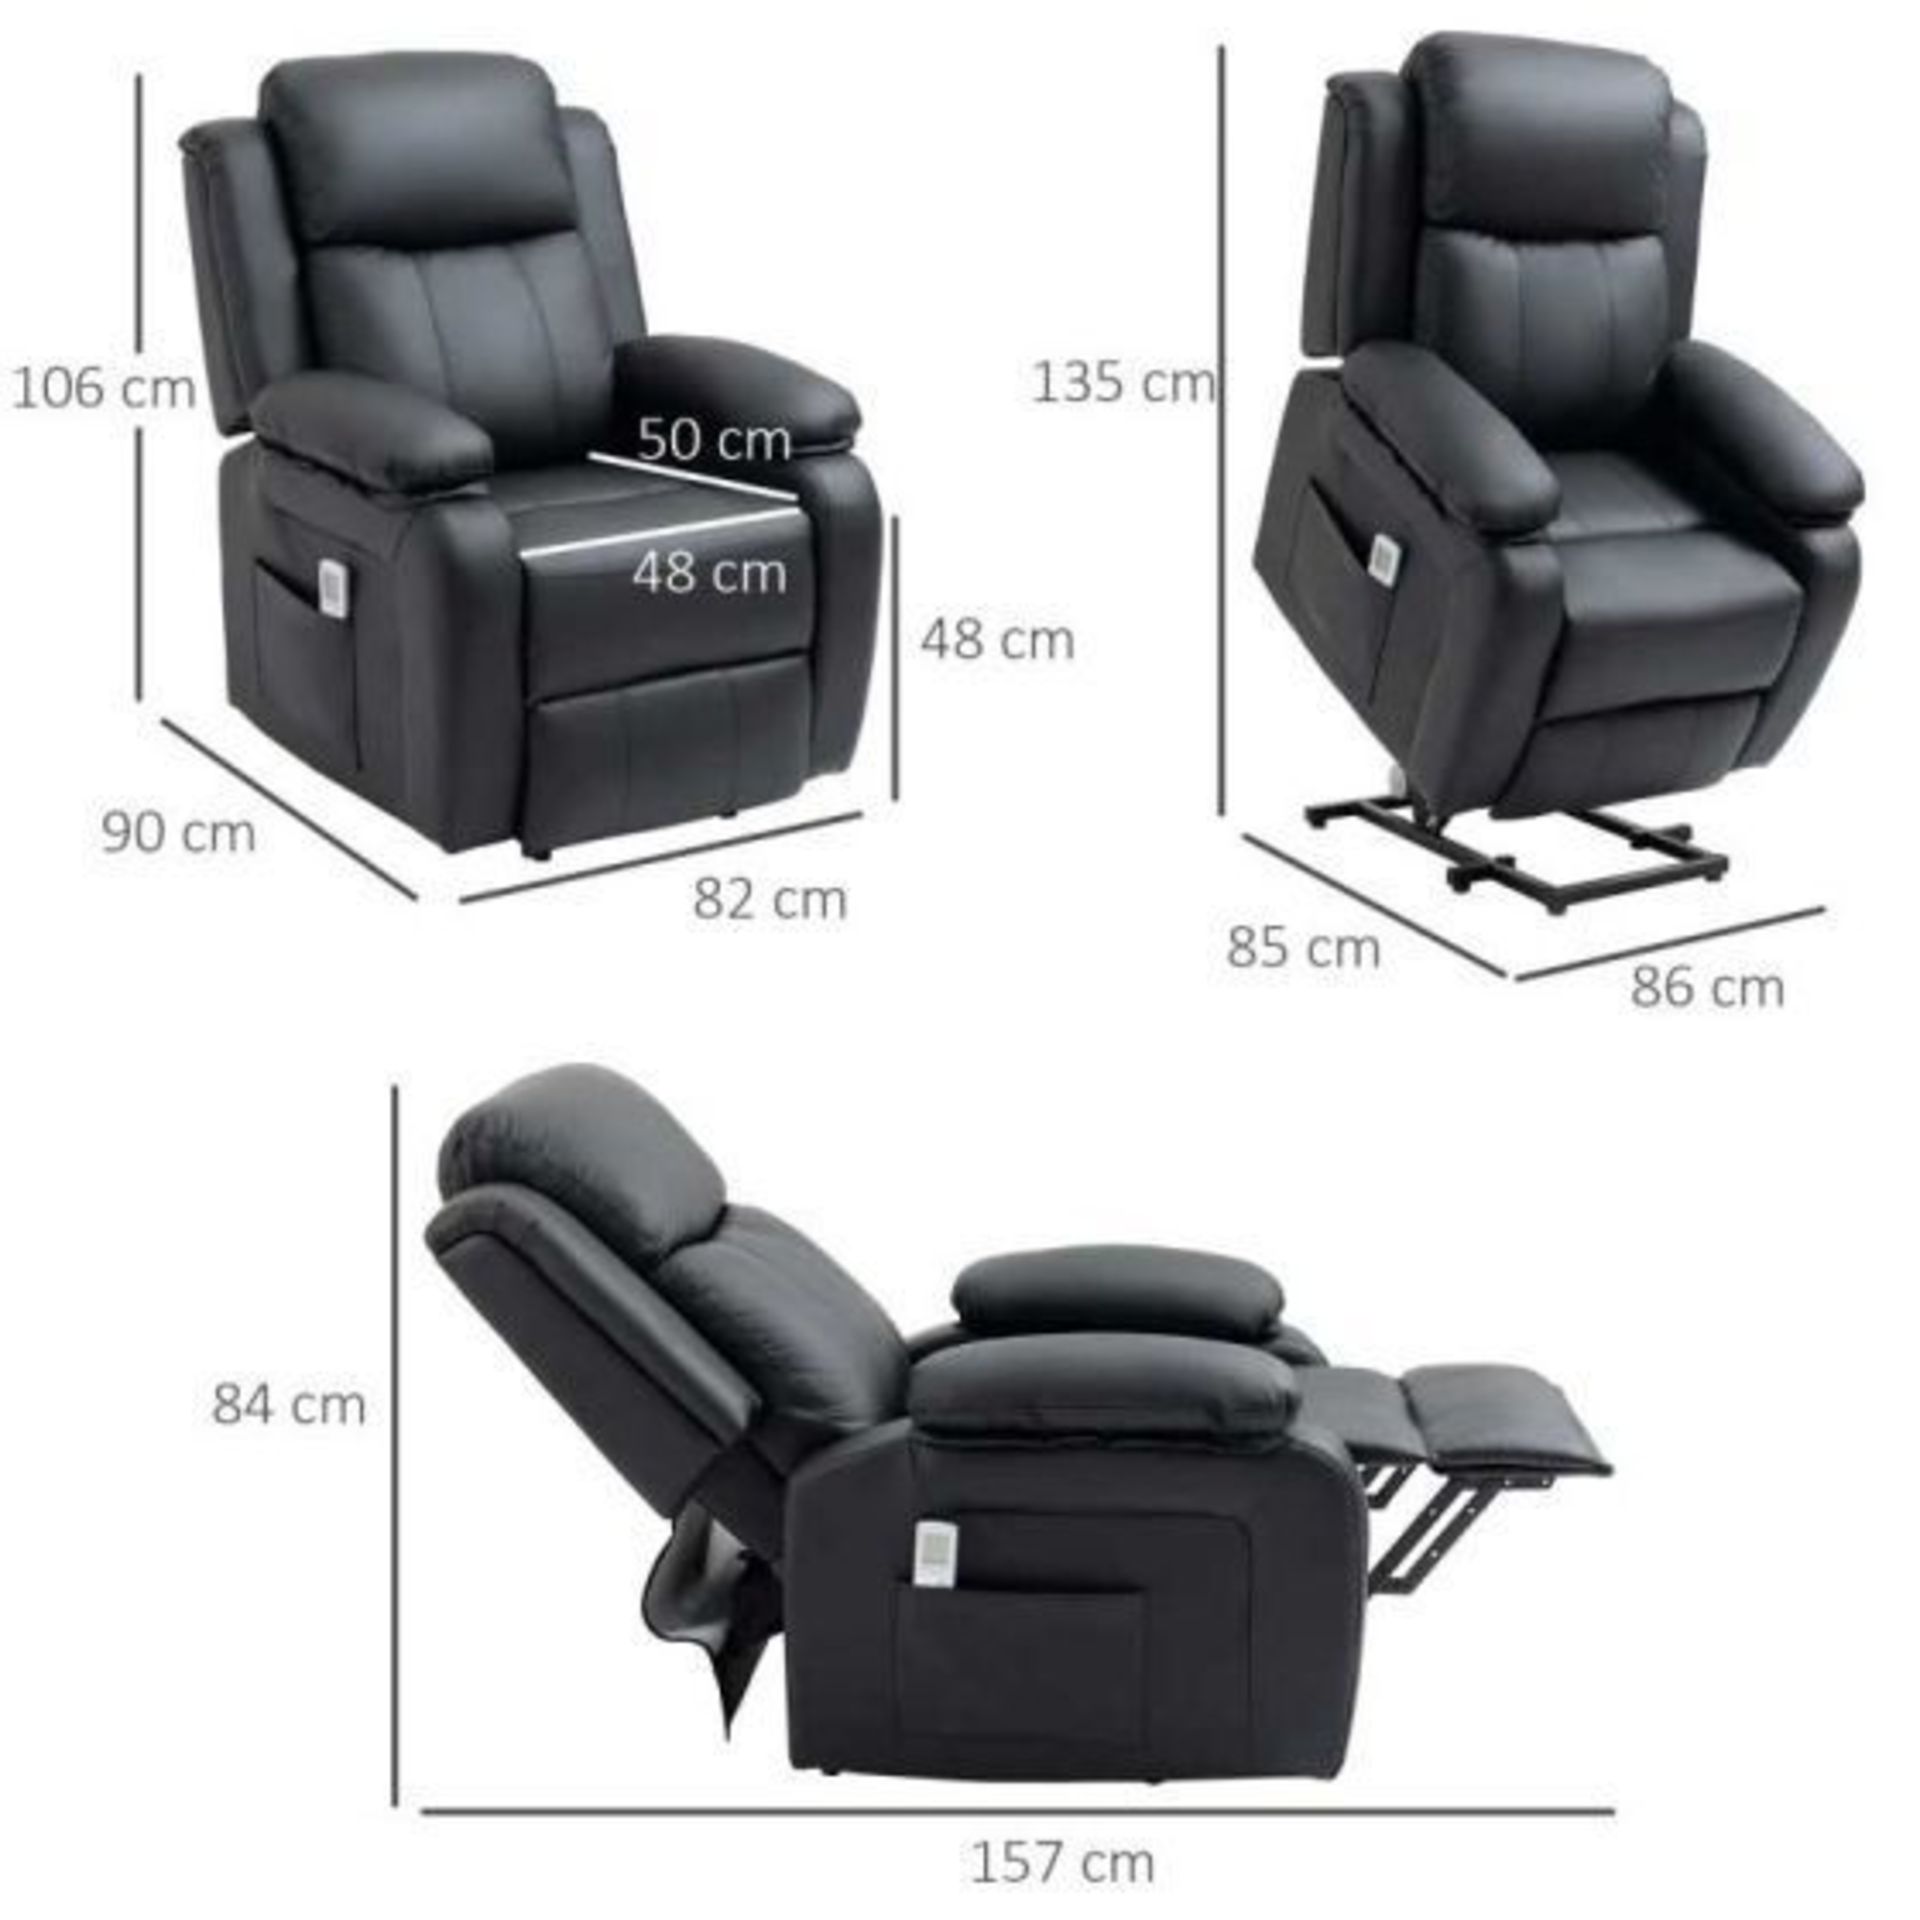 HOMCOM Electric Mobility Lift & Rise Recliner Chair with Vibration Massage - Black. - Rack. RRP £ - Image 4 of 4